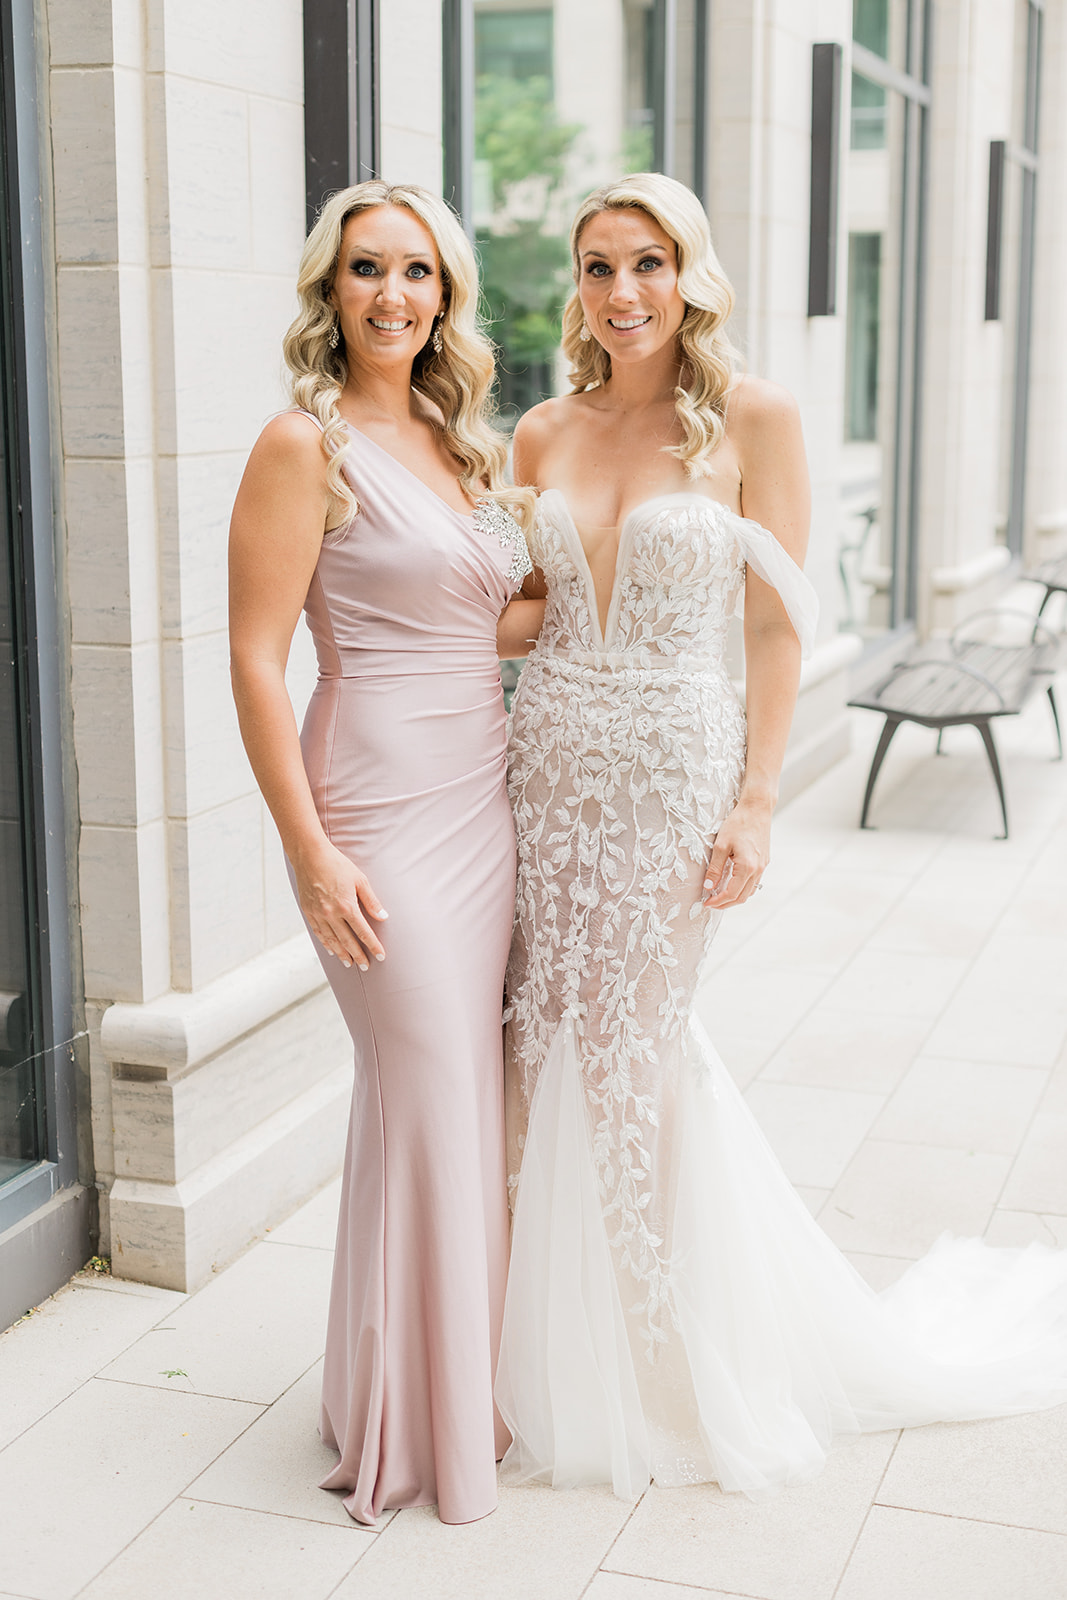 bride maid of honor portrait photo at farm to table wedding by jess collins photography